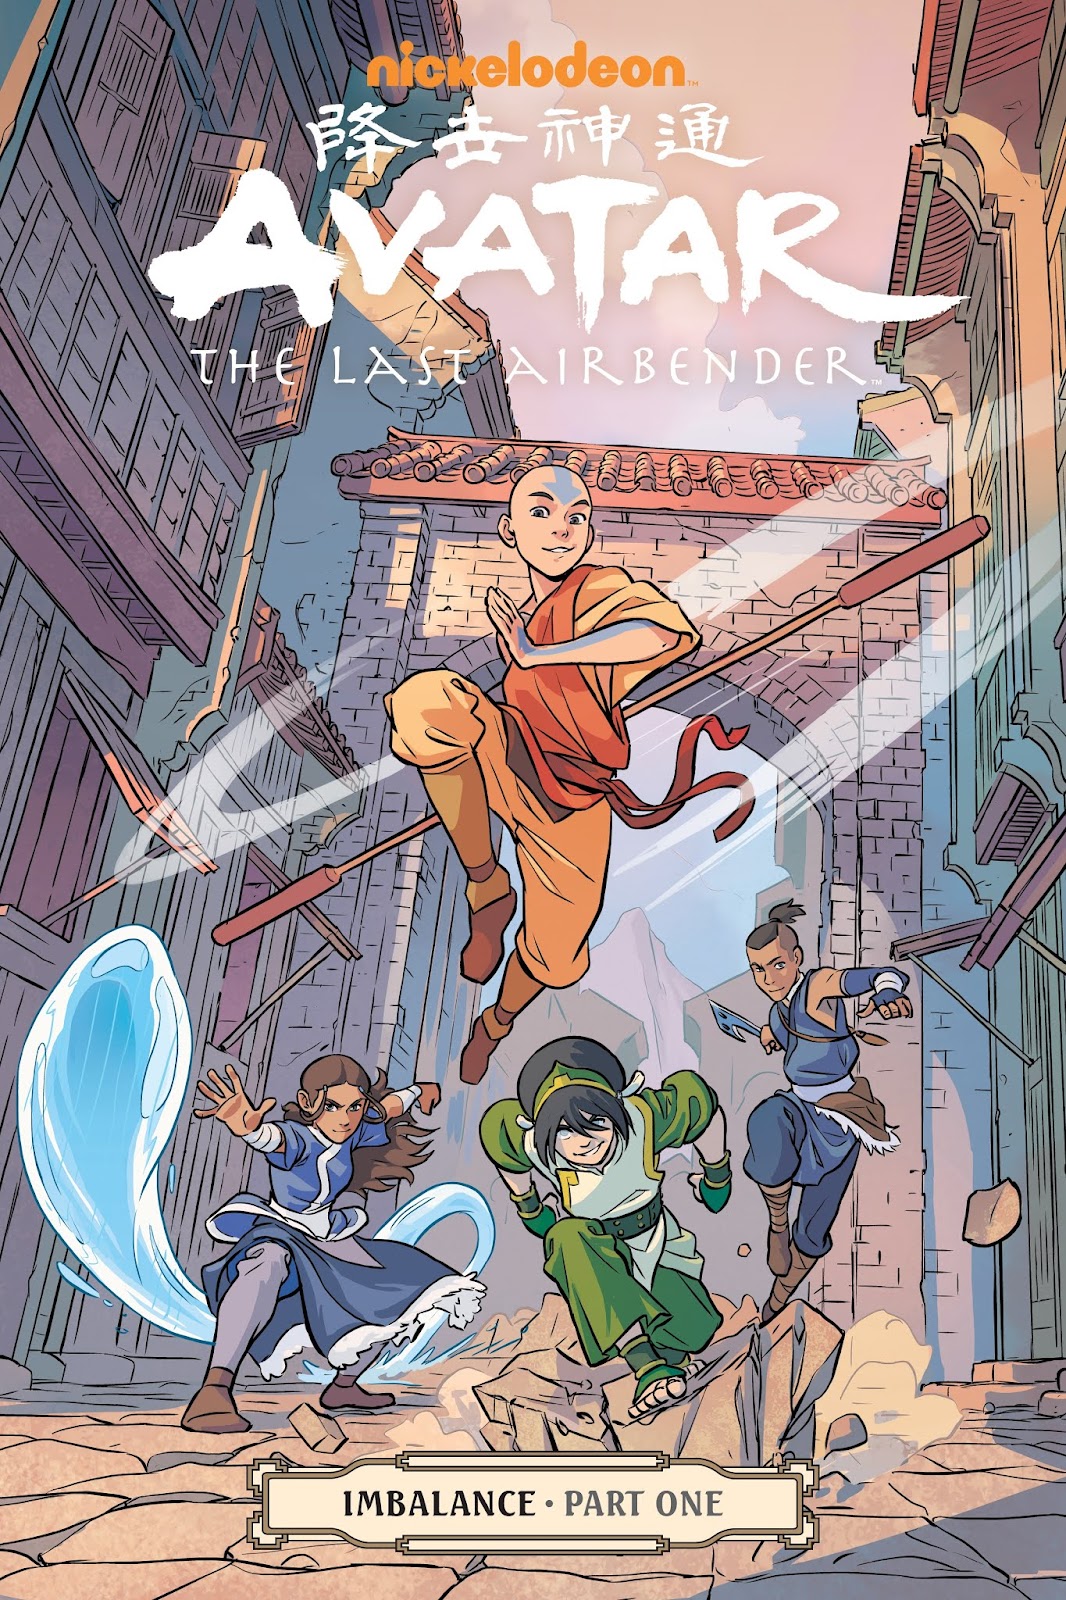 Read online Nickelodeon Avatar: The Last Airbender - Imbalance comic -  Issue # TPB 1 - 1